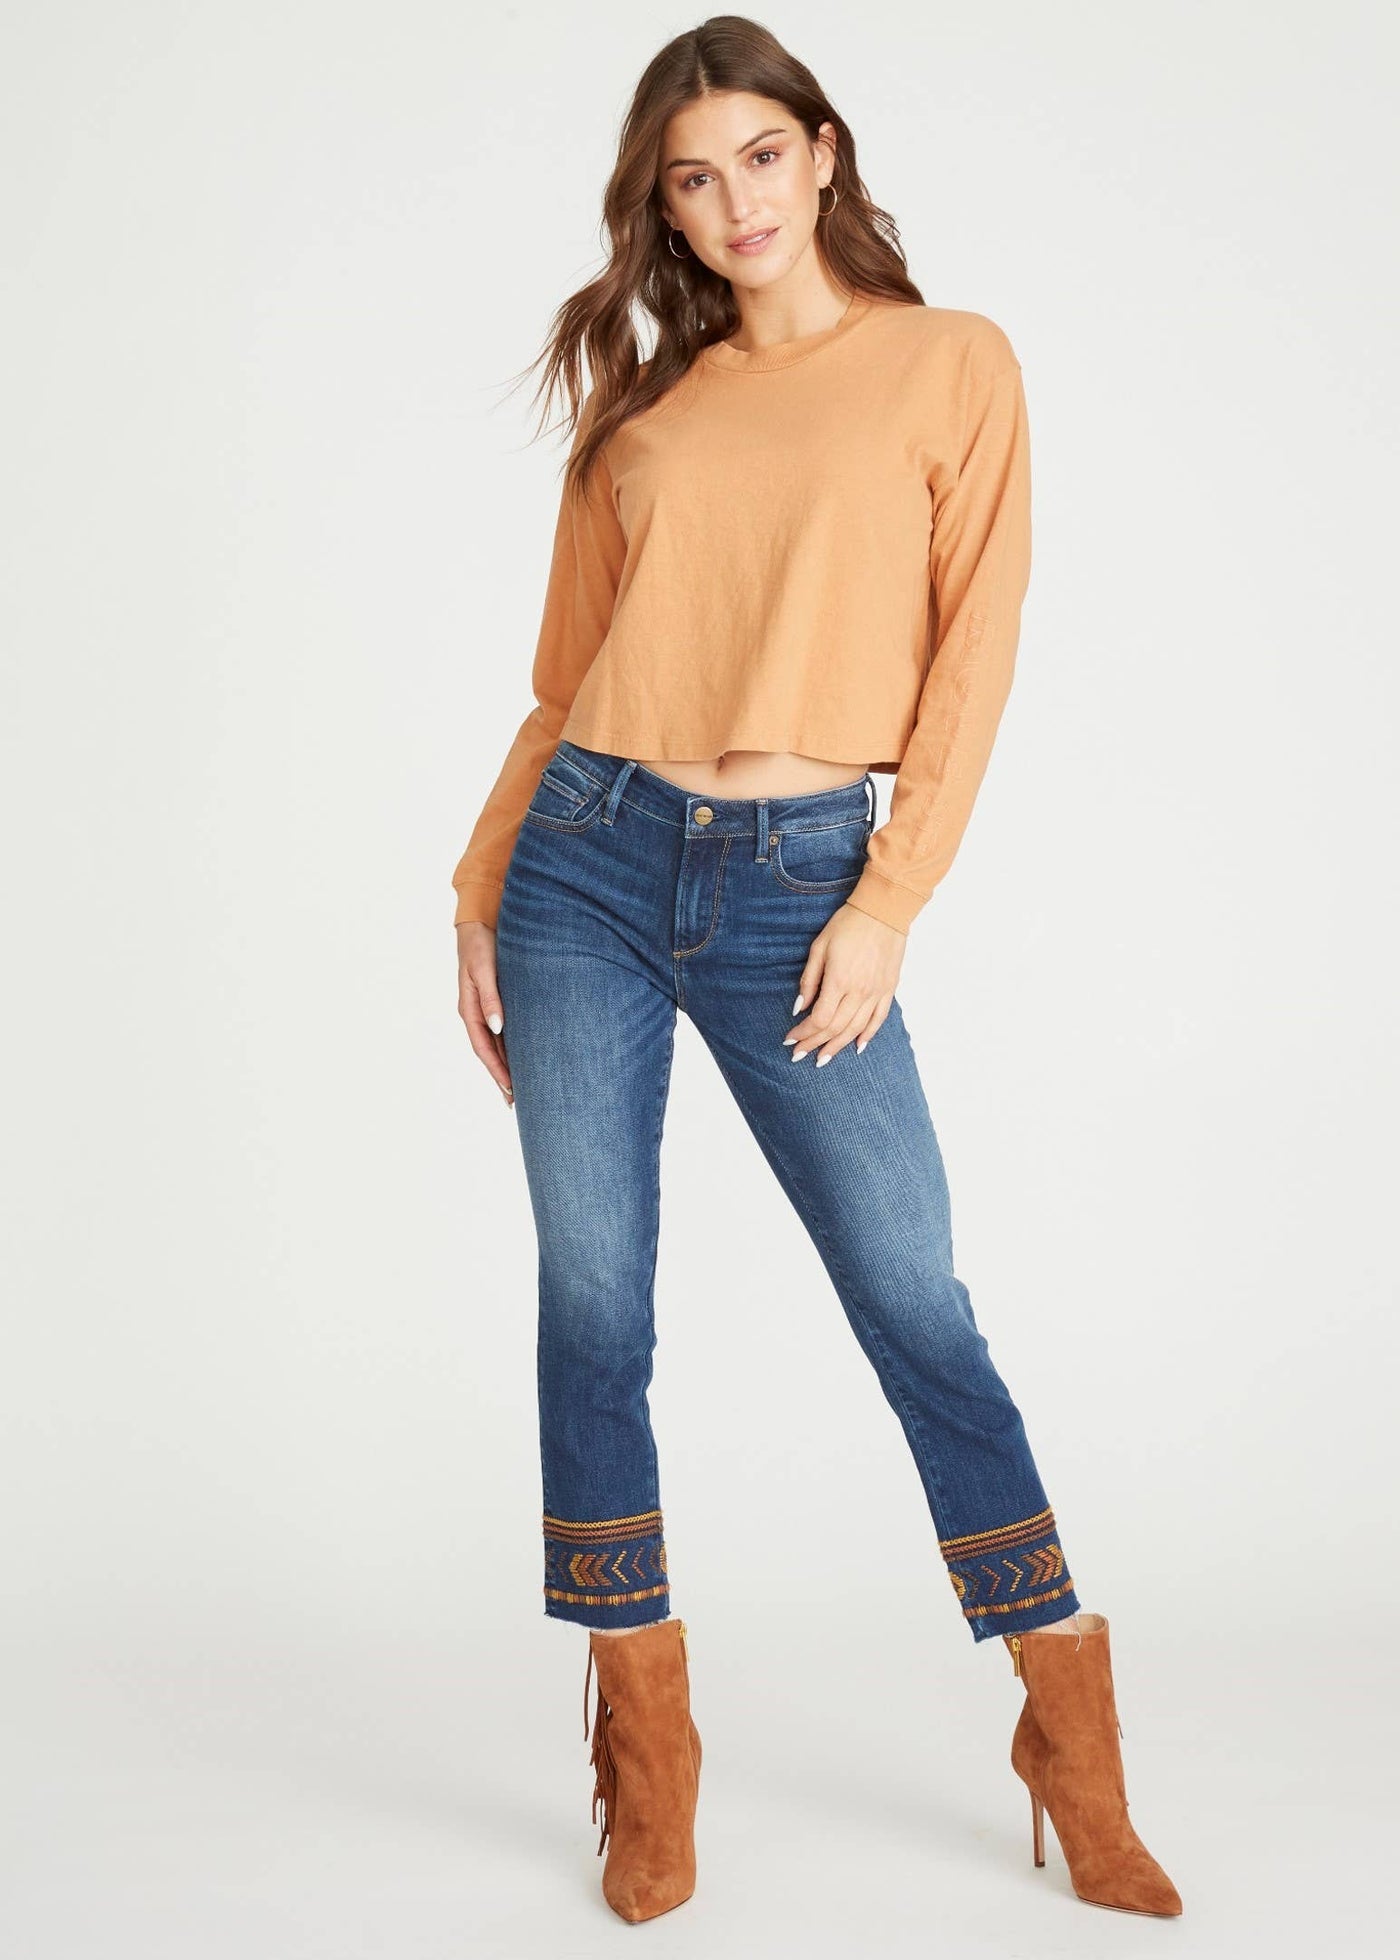 Colette Cropped Jeans